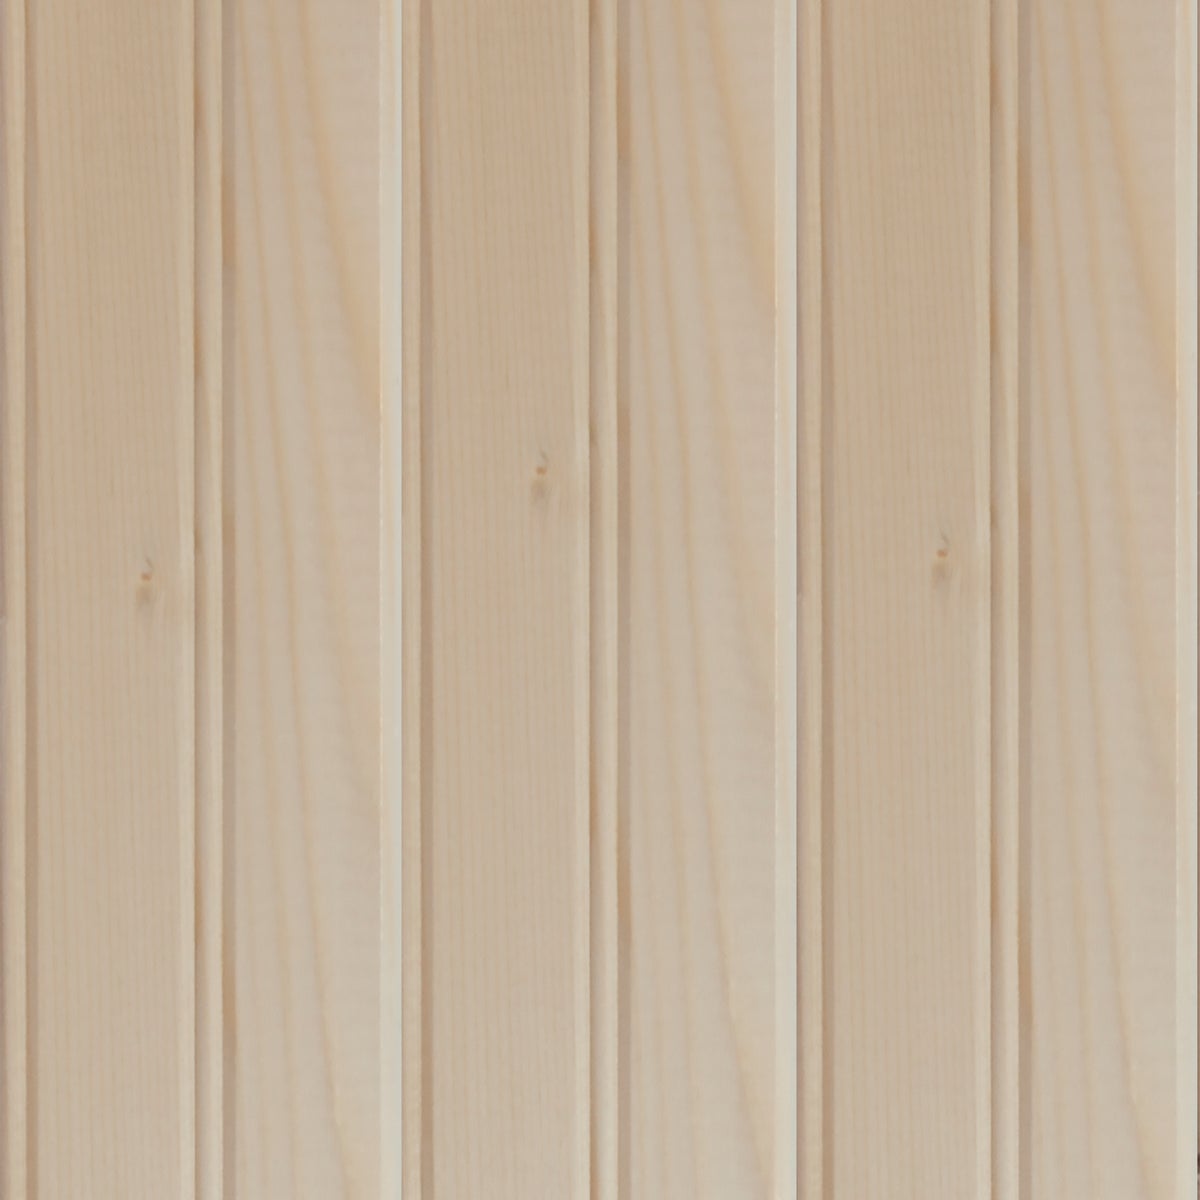 Global Product Sourcing 3-1/2 In. W. x 8 Ft. L. x 5/16 In. Thick Knotty Pine Reversible Profile Wall Plank (6-Pack)